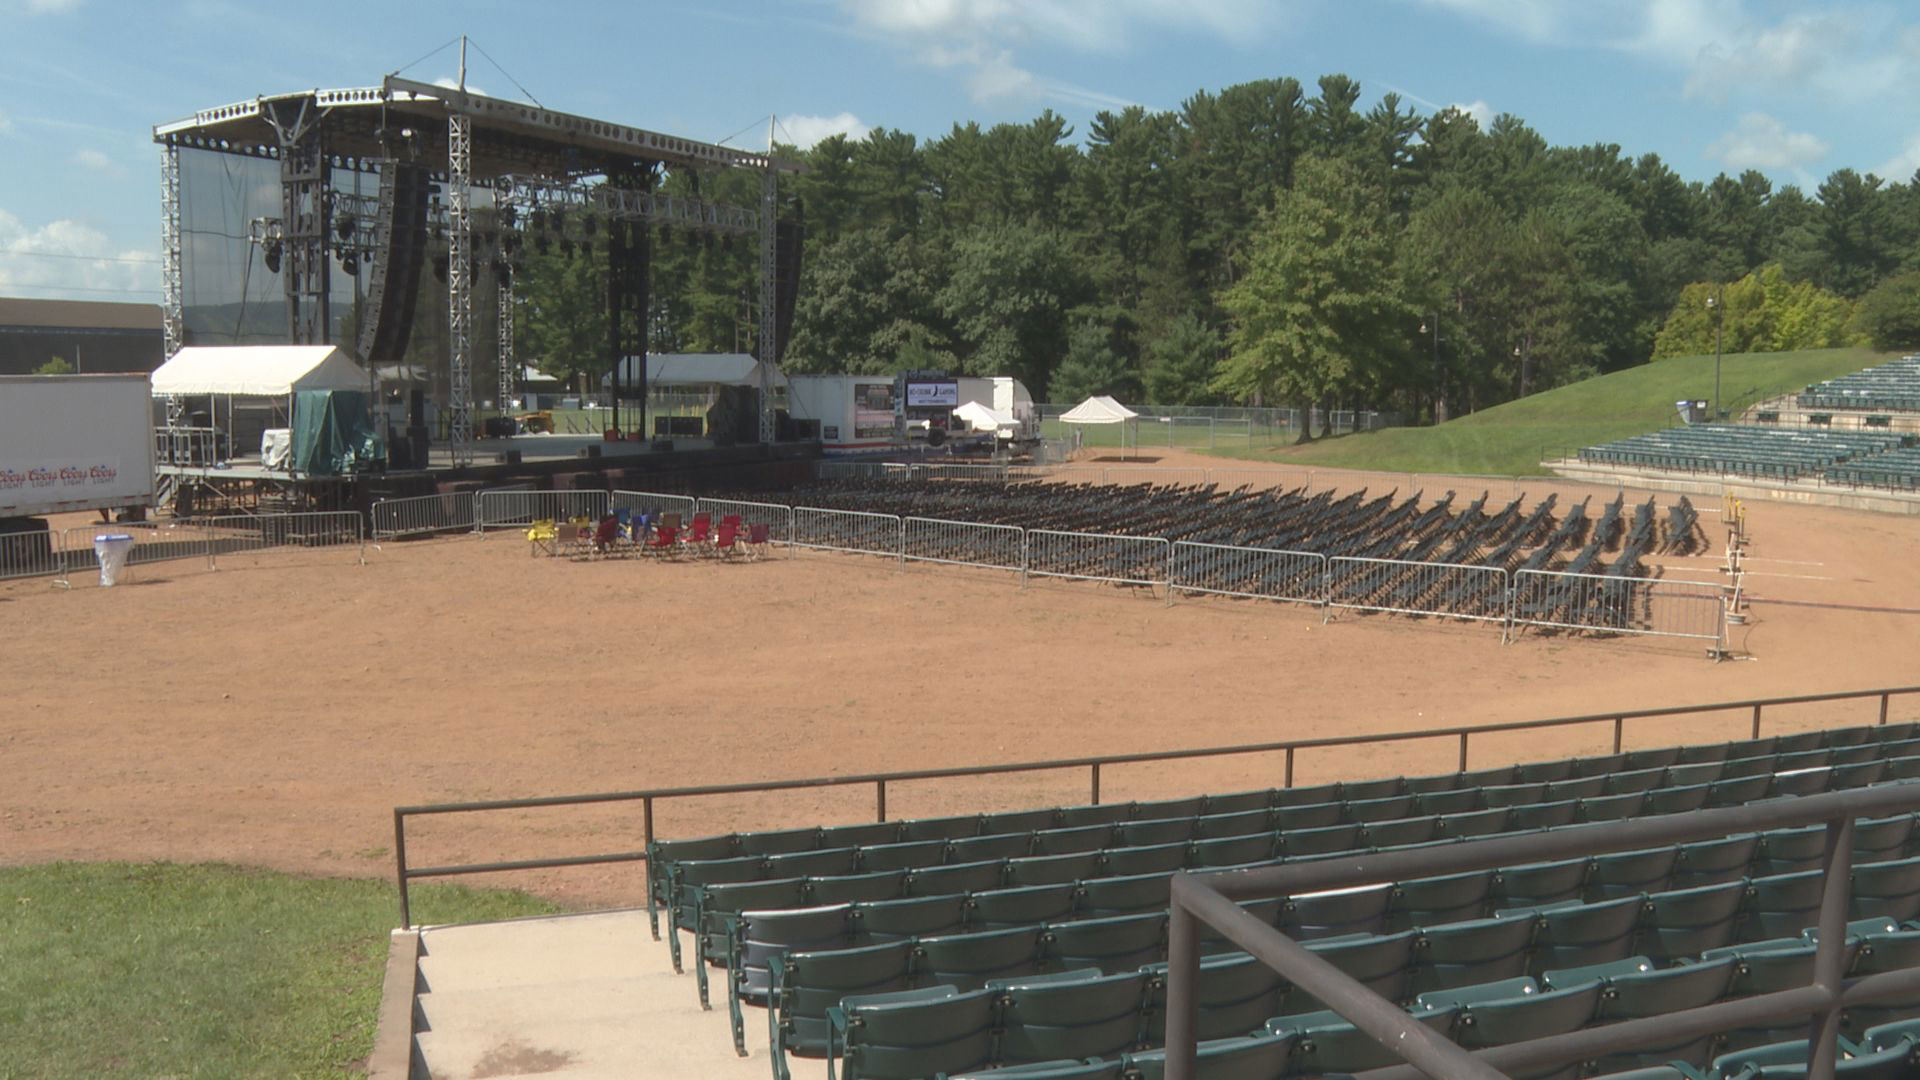 Artist booking prices on the rise for the Wisconsin Valley Fair